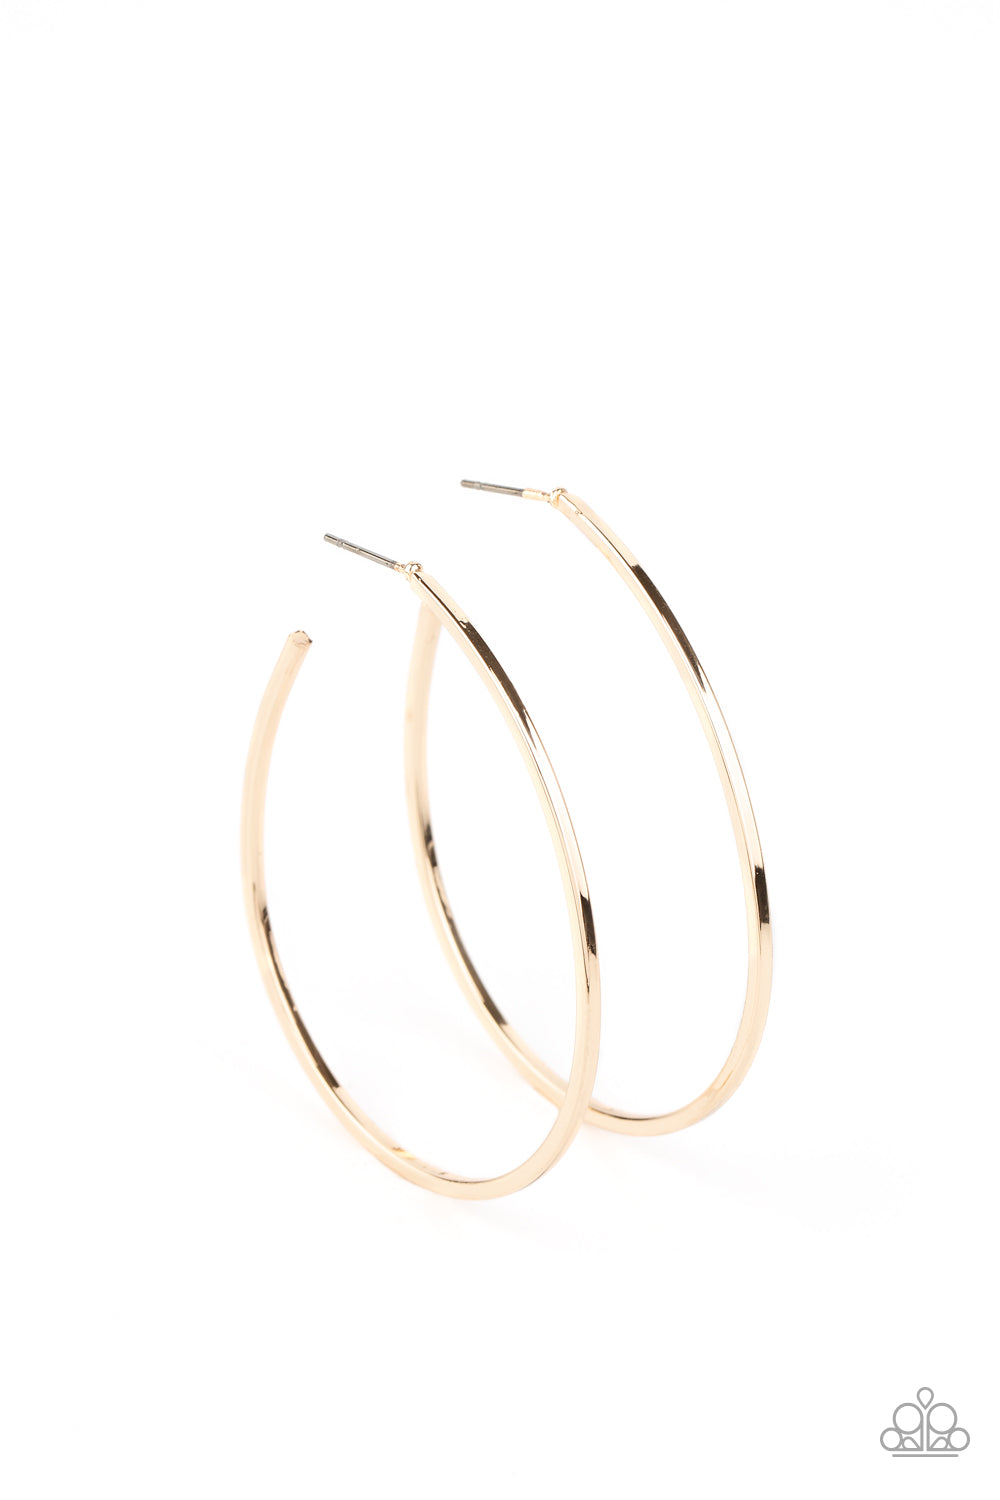 Cool Curves - Gold Earrings